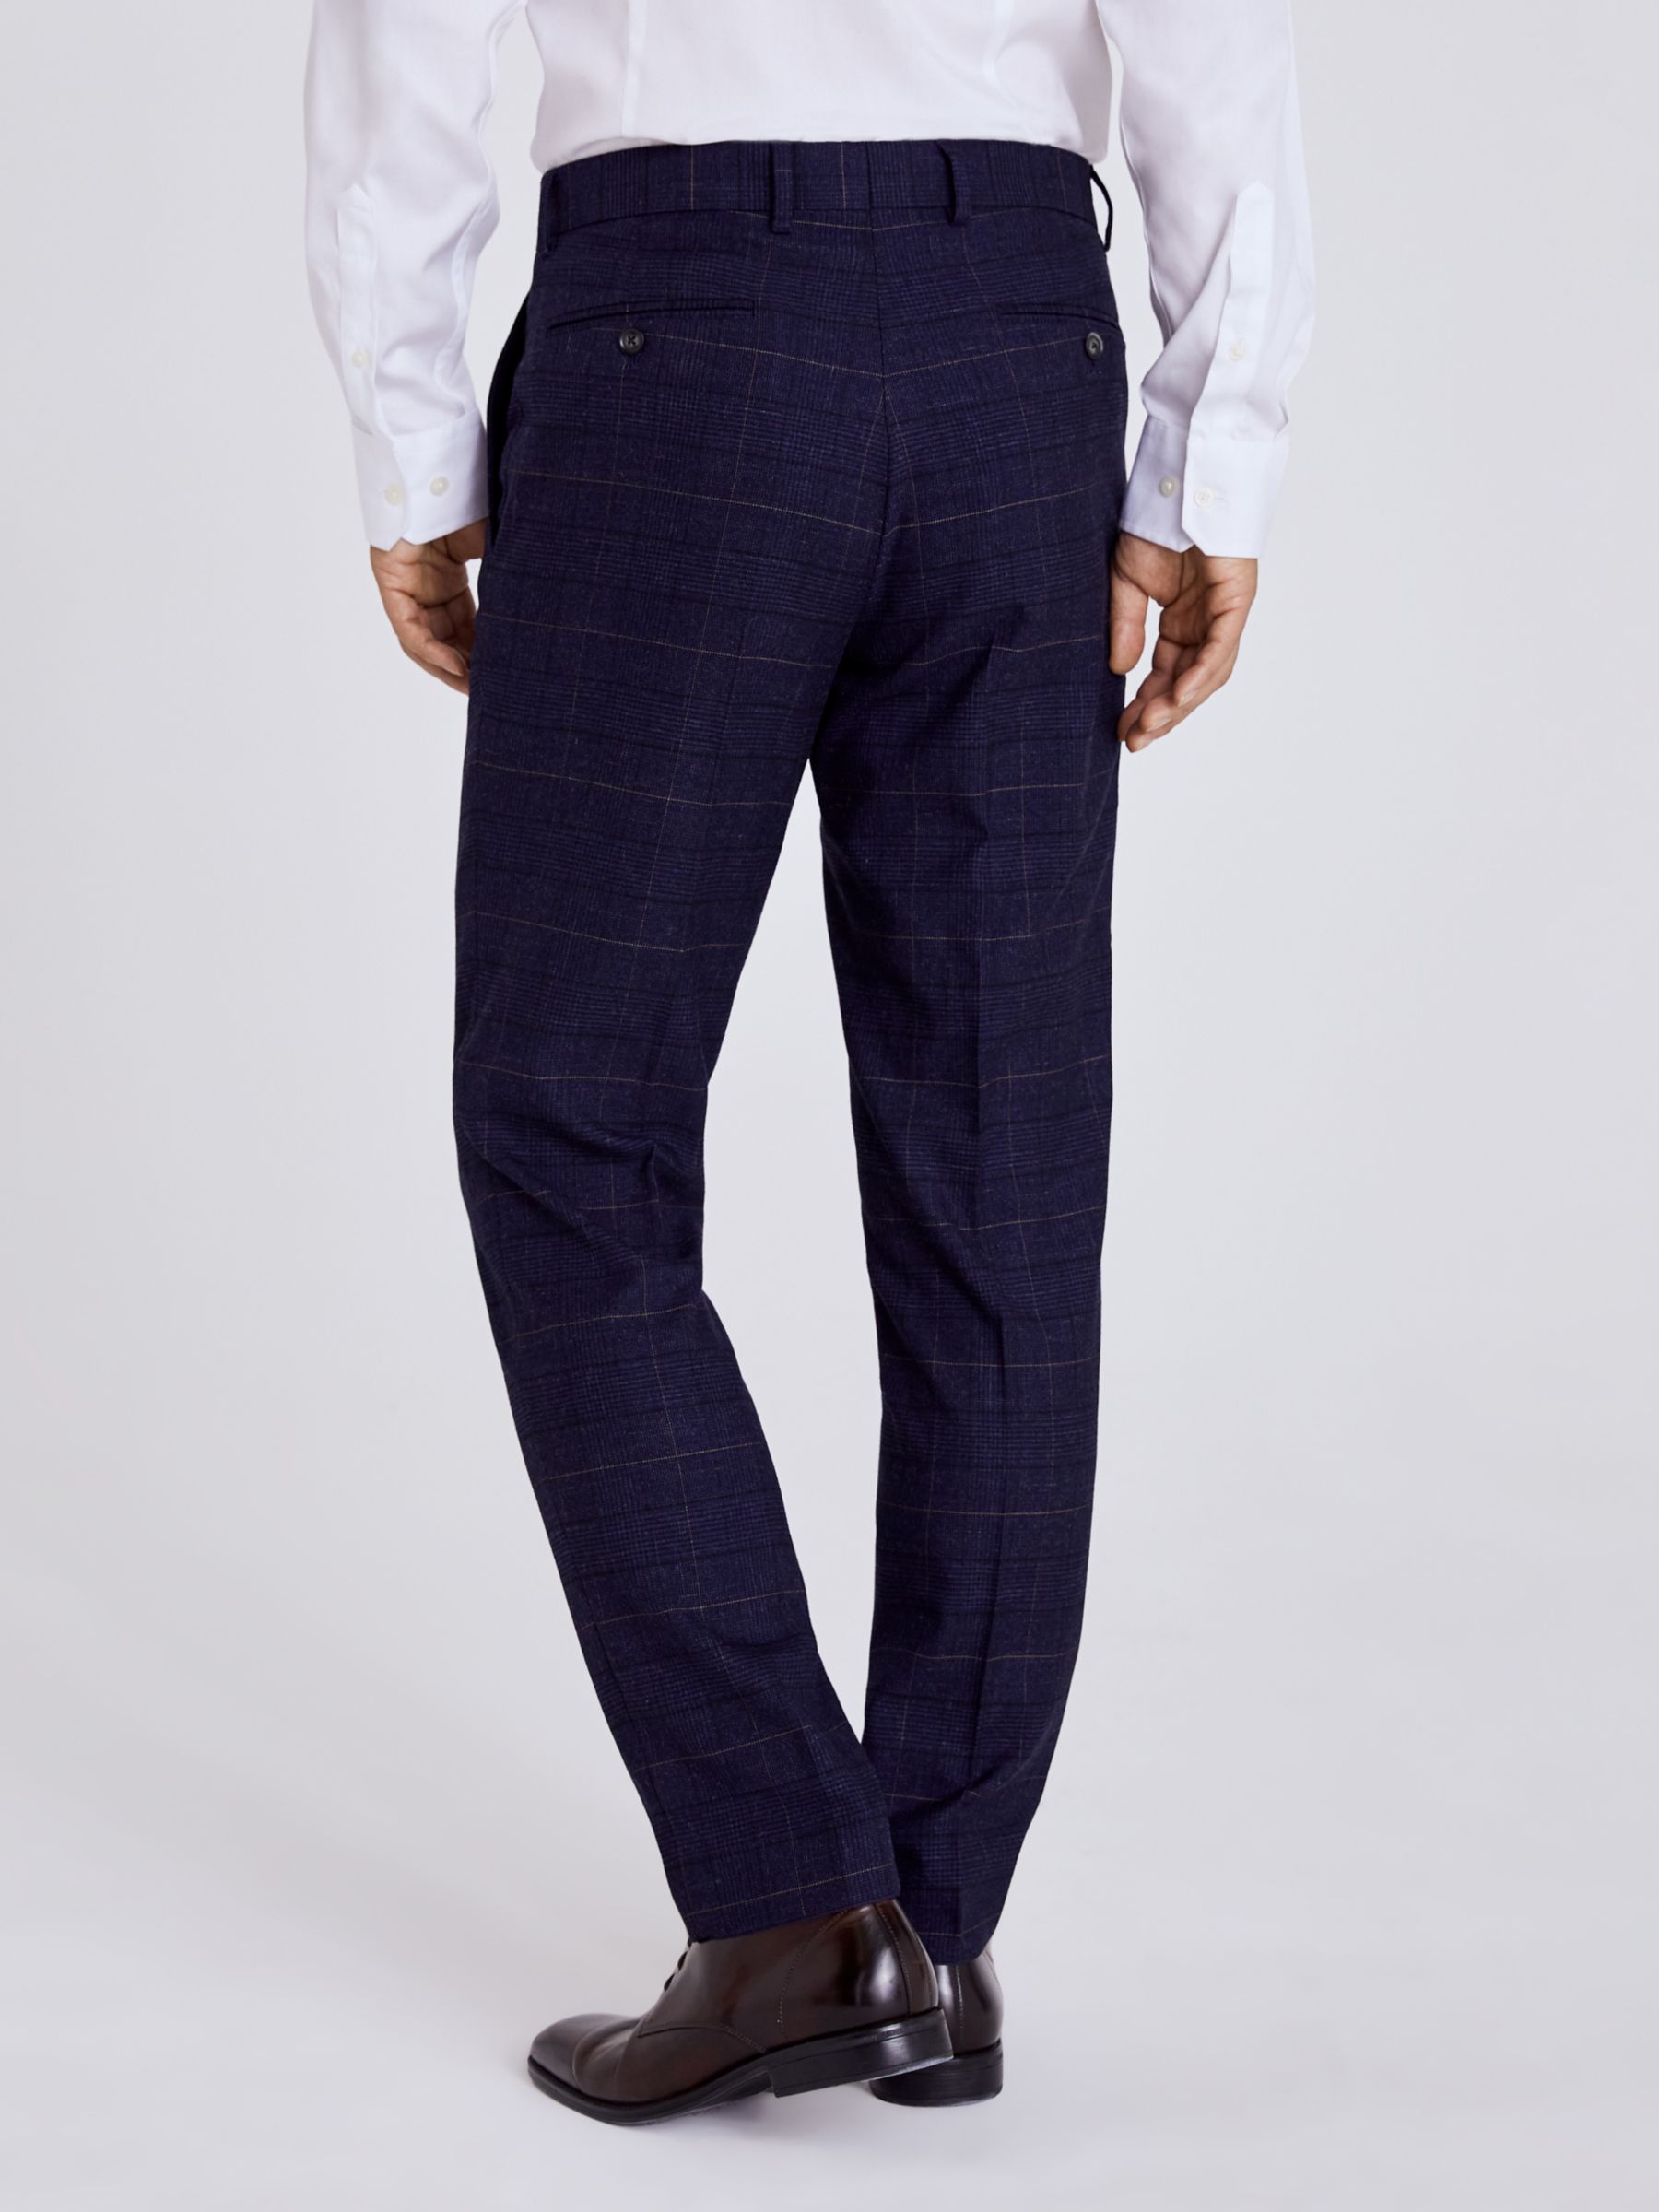 Moss Tailored Check Suit Trousers, Navy/Black, 30S